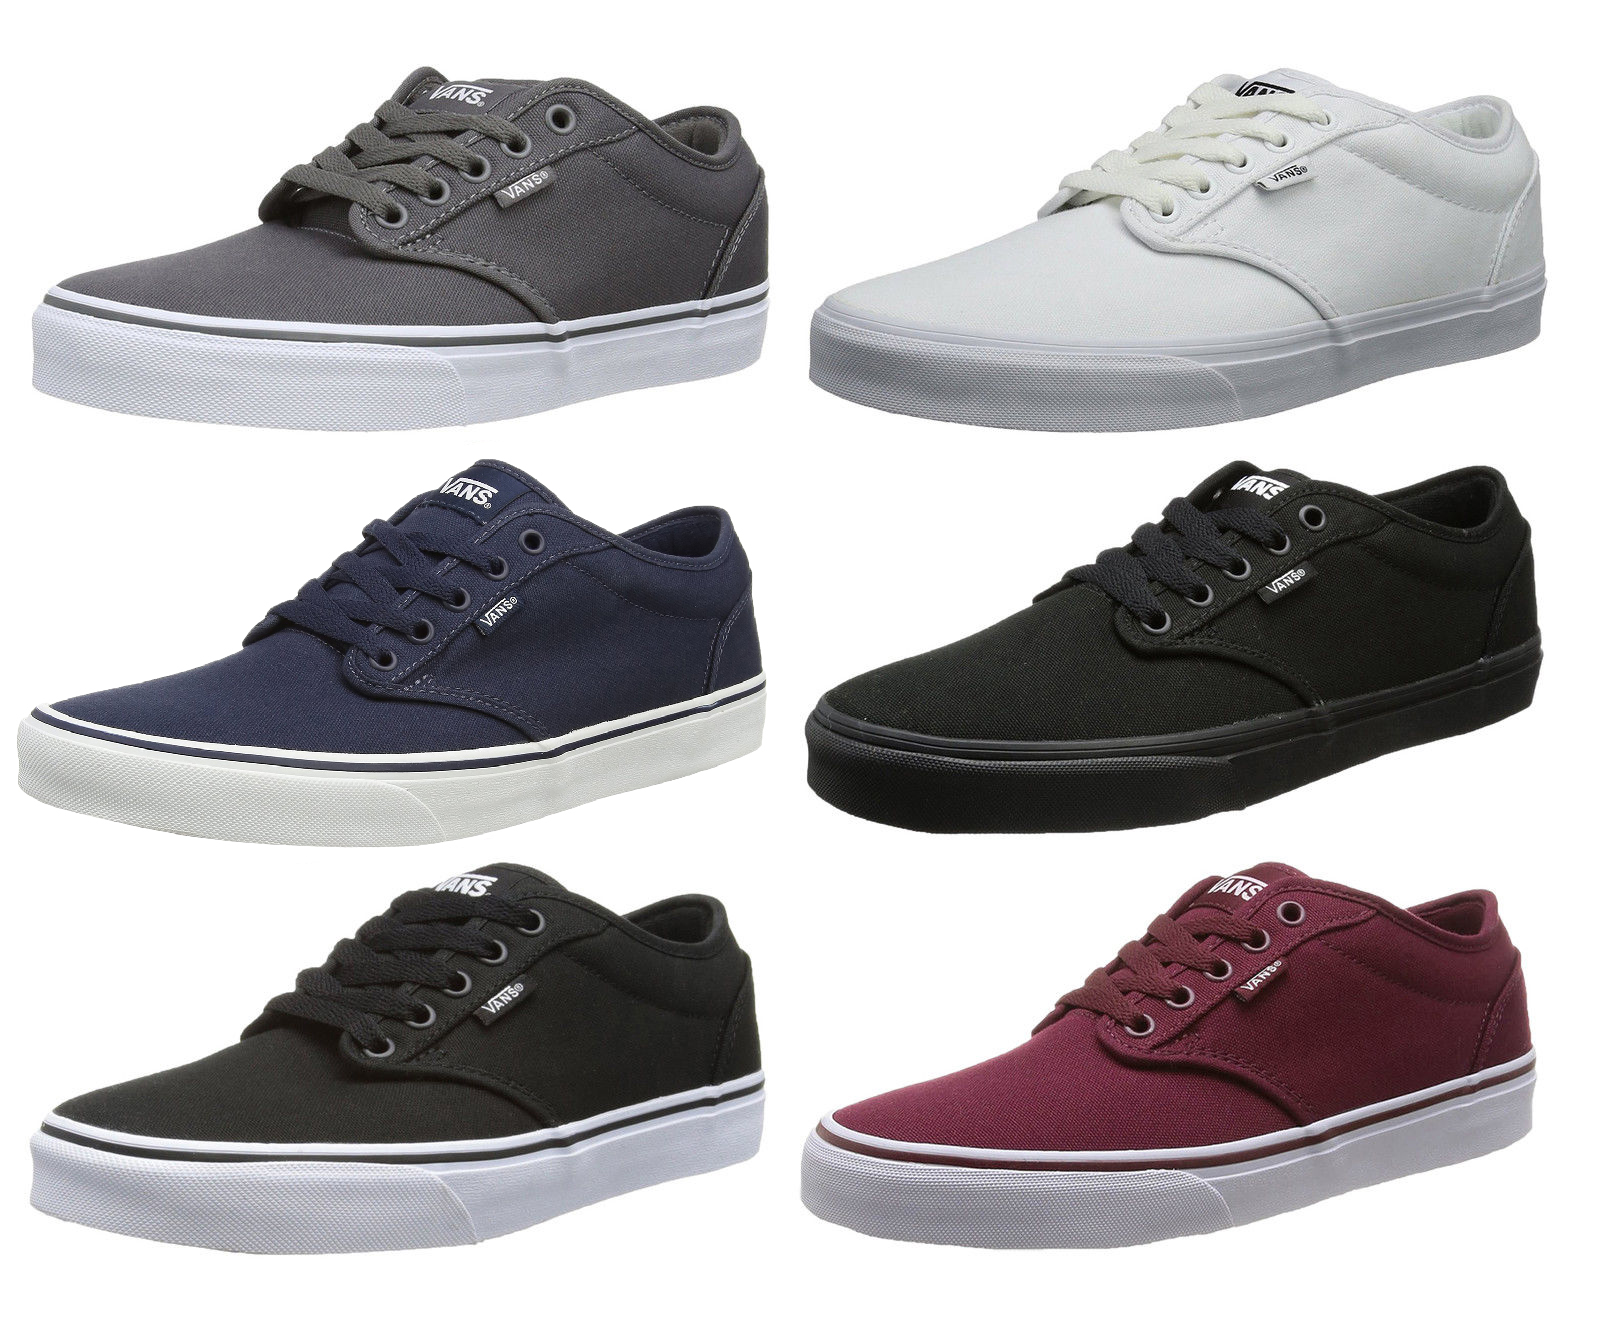 VANS Atwood Canvas Fashion Skater Shoes 